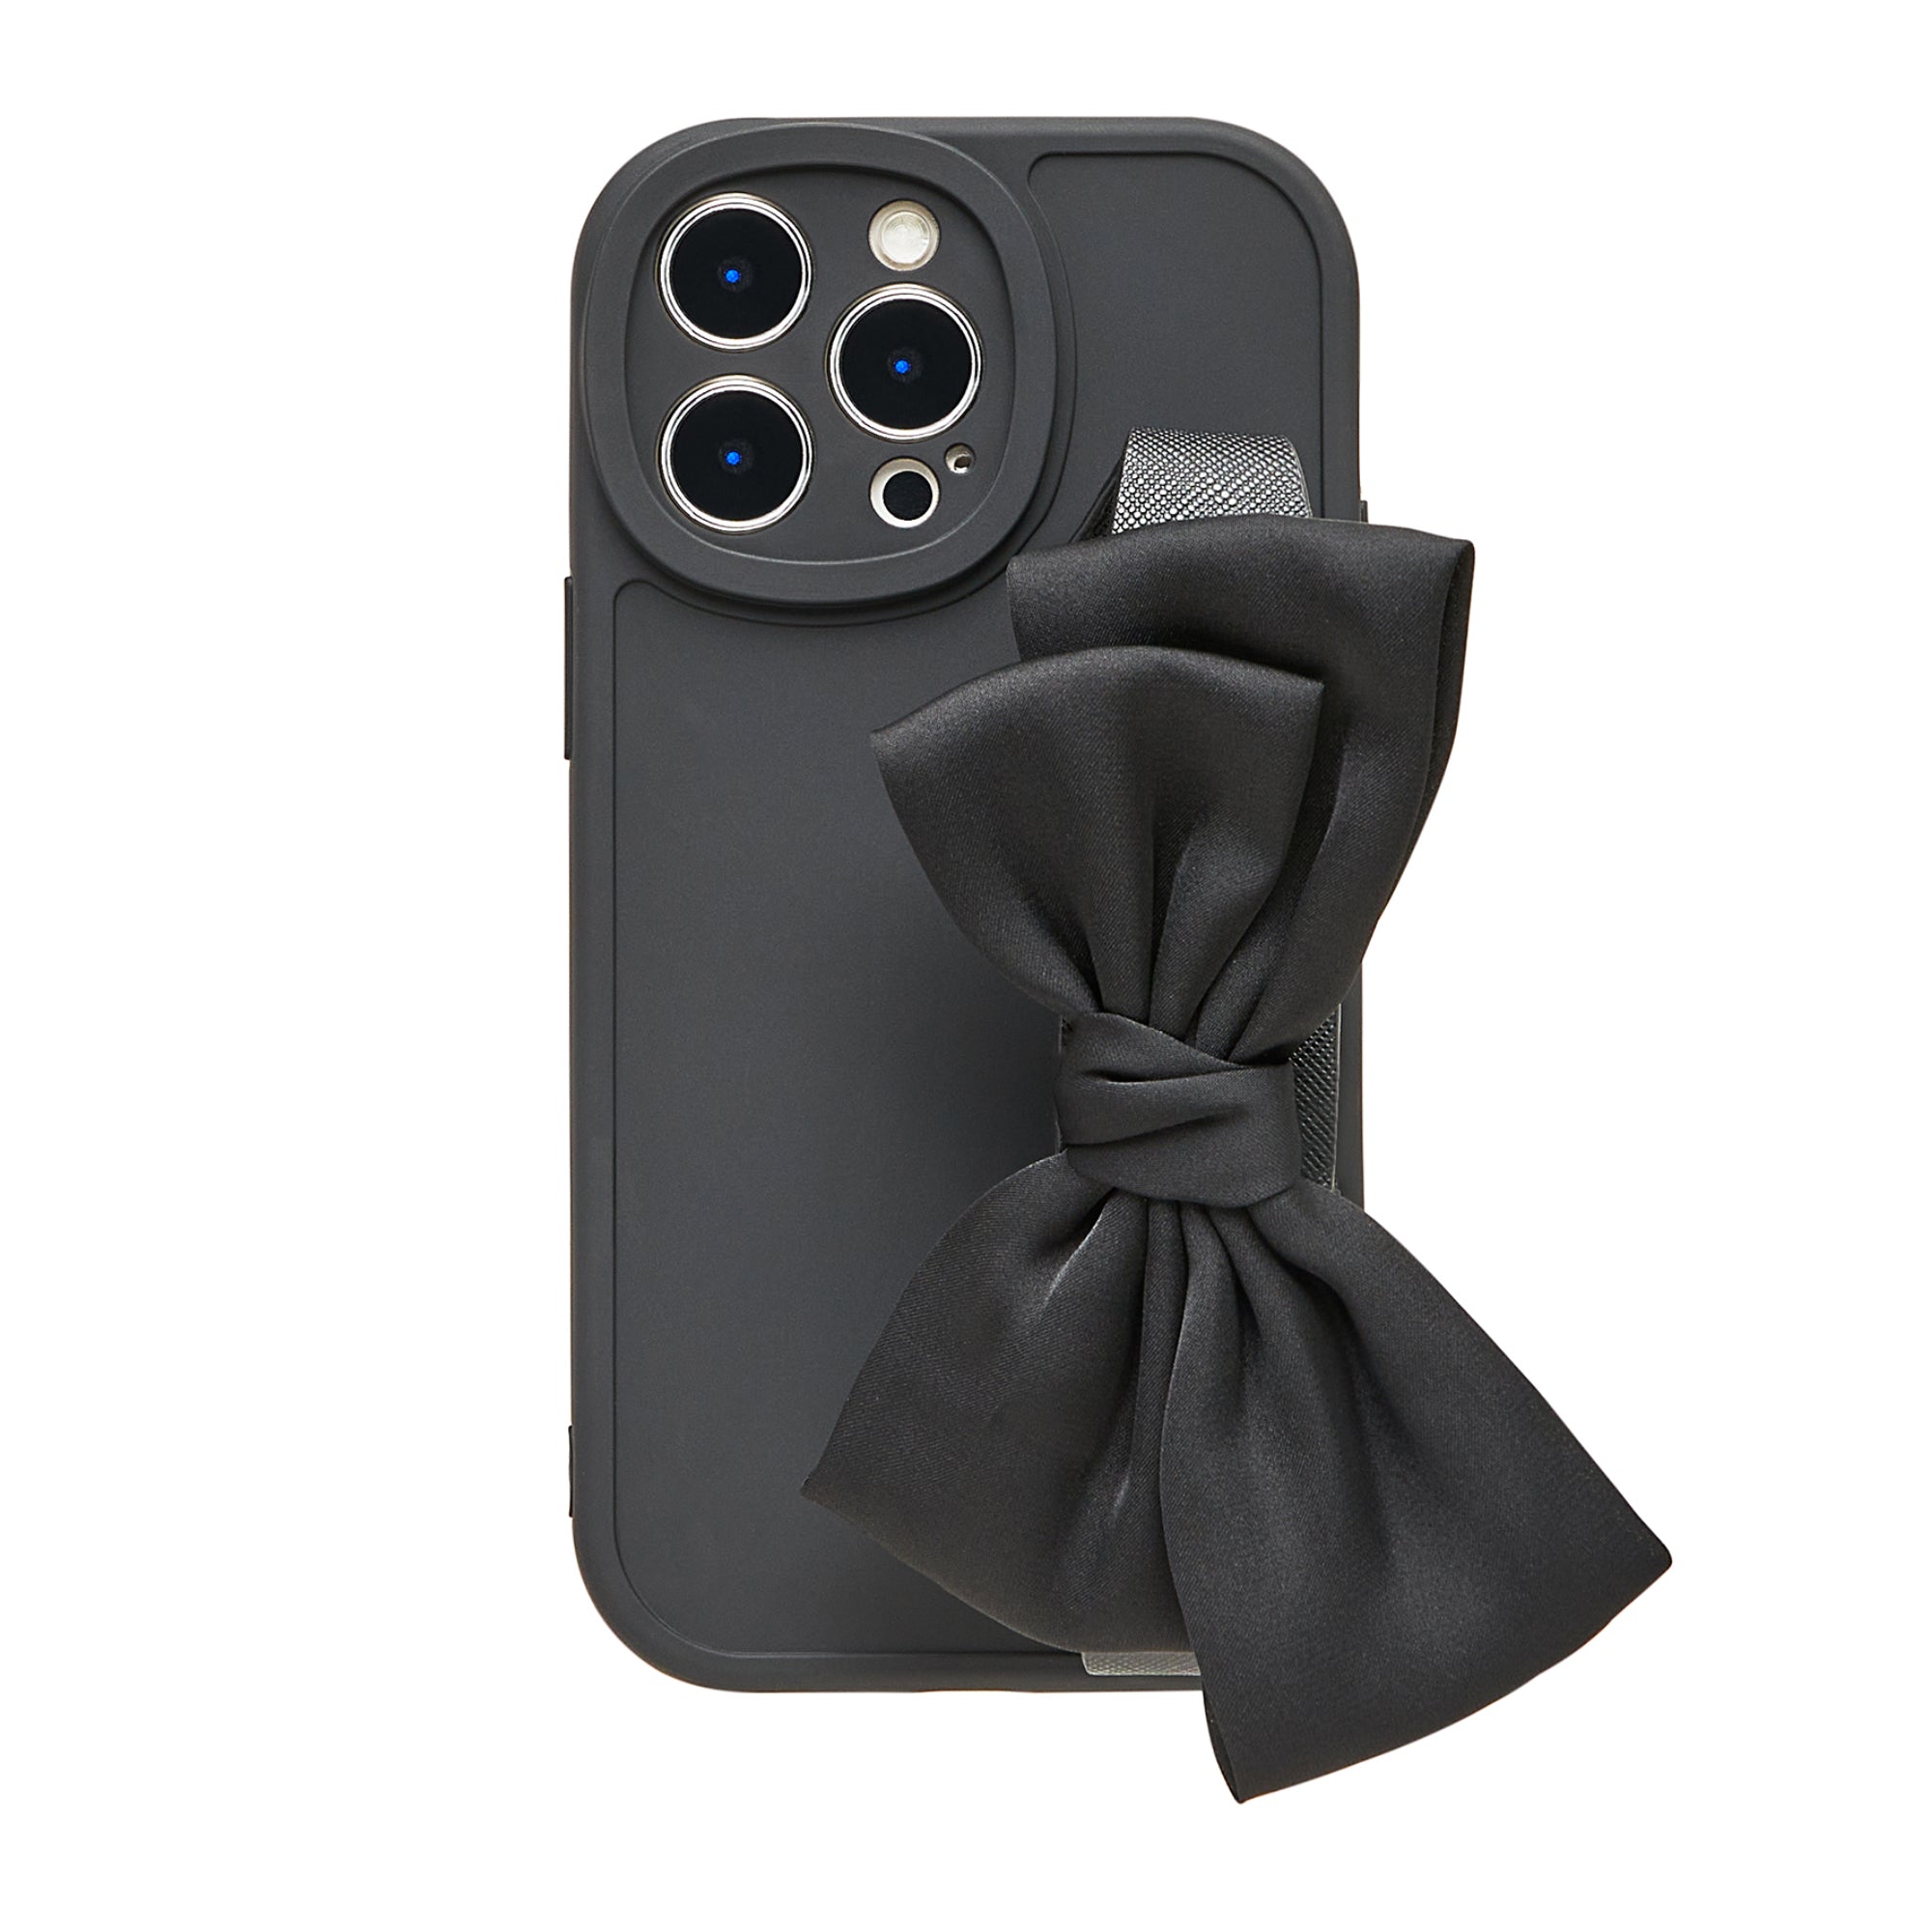 Bowknot Wristlet Solid Phone Case